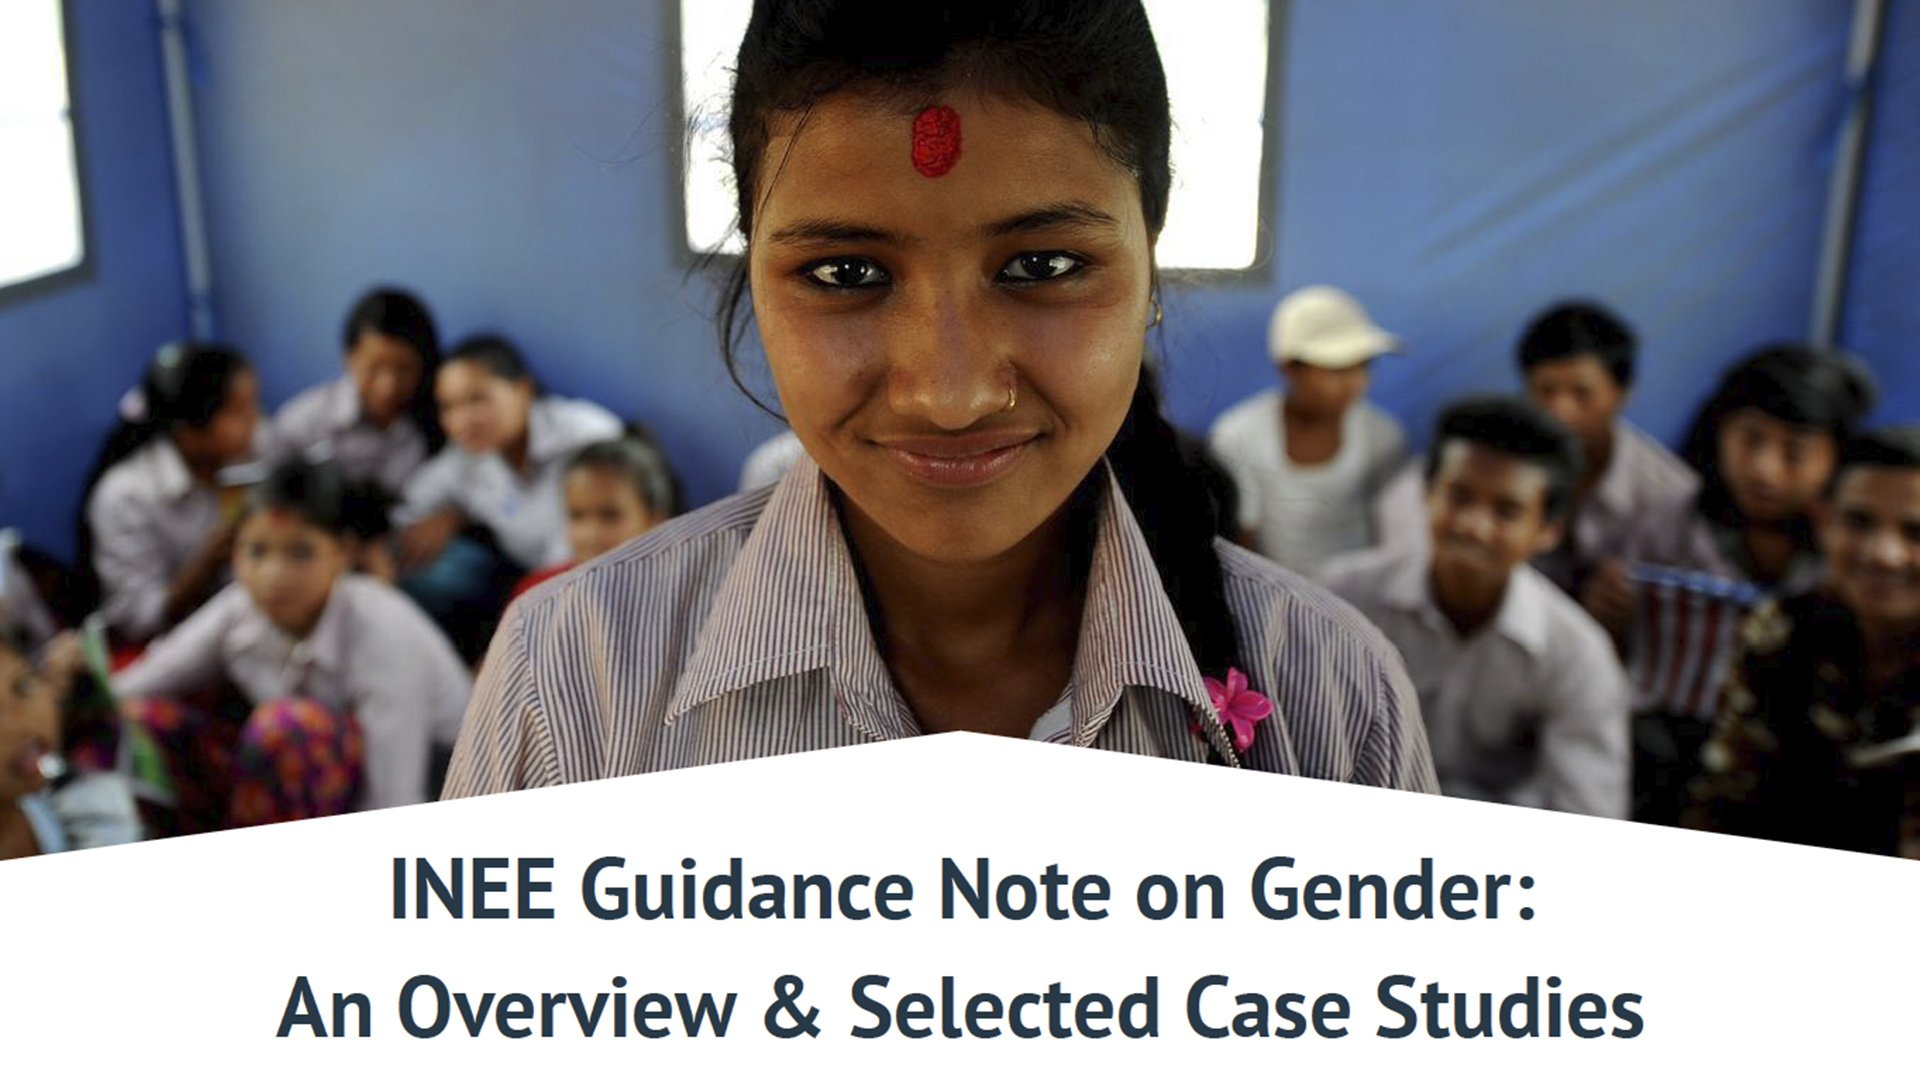 [Webinar] Gender Equality in and through Education